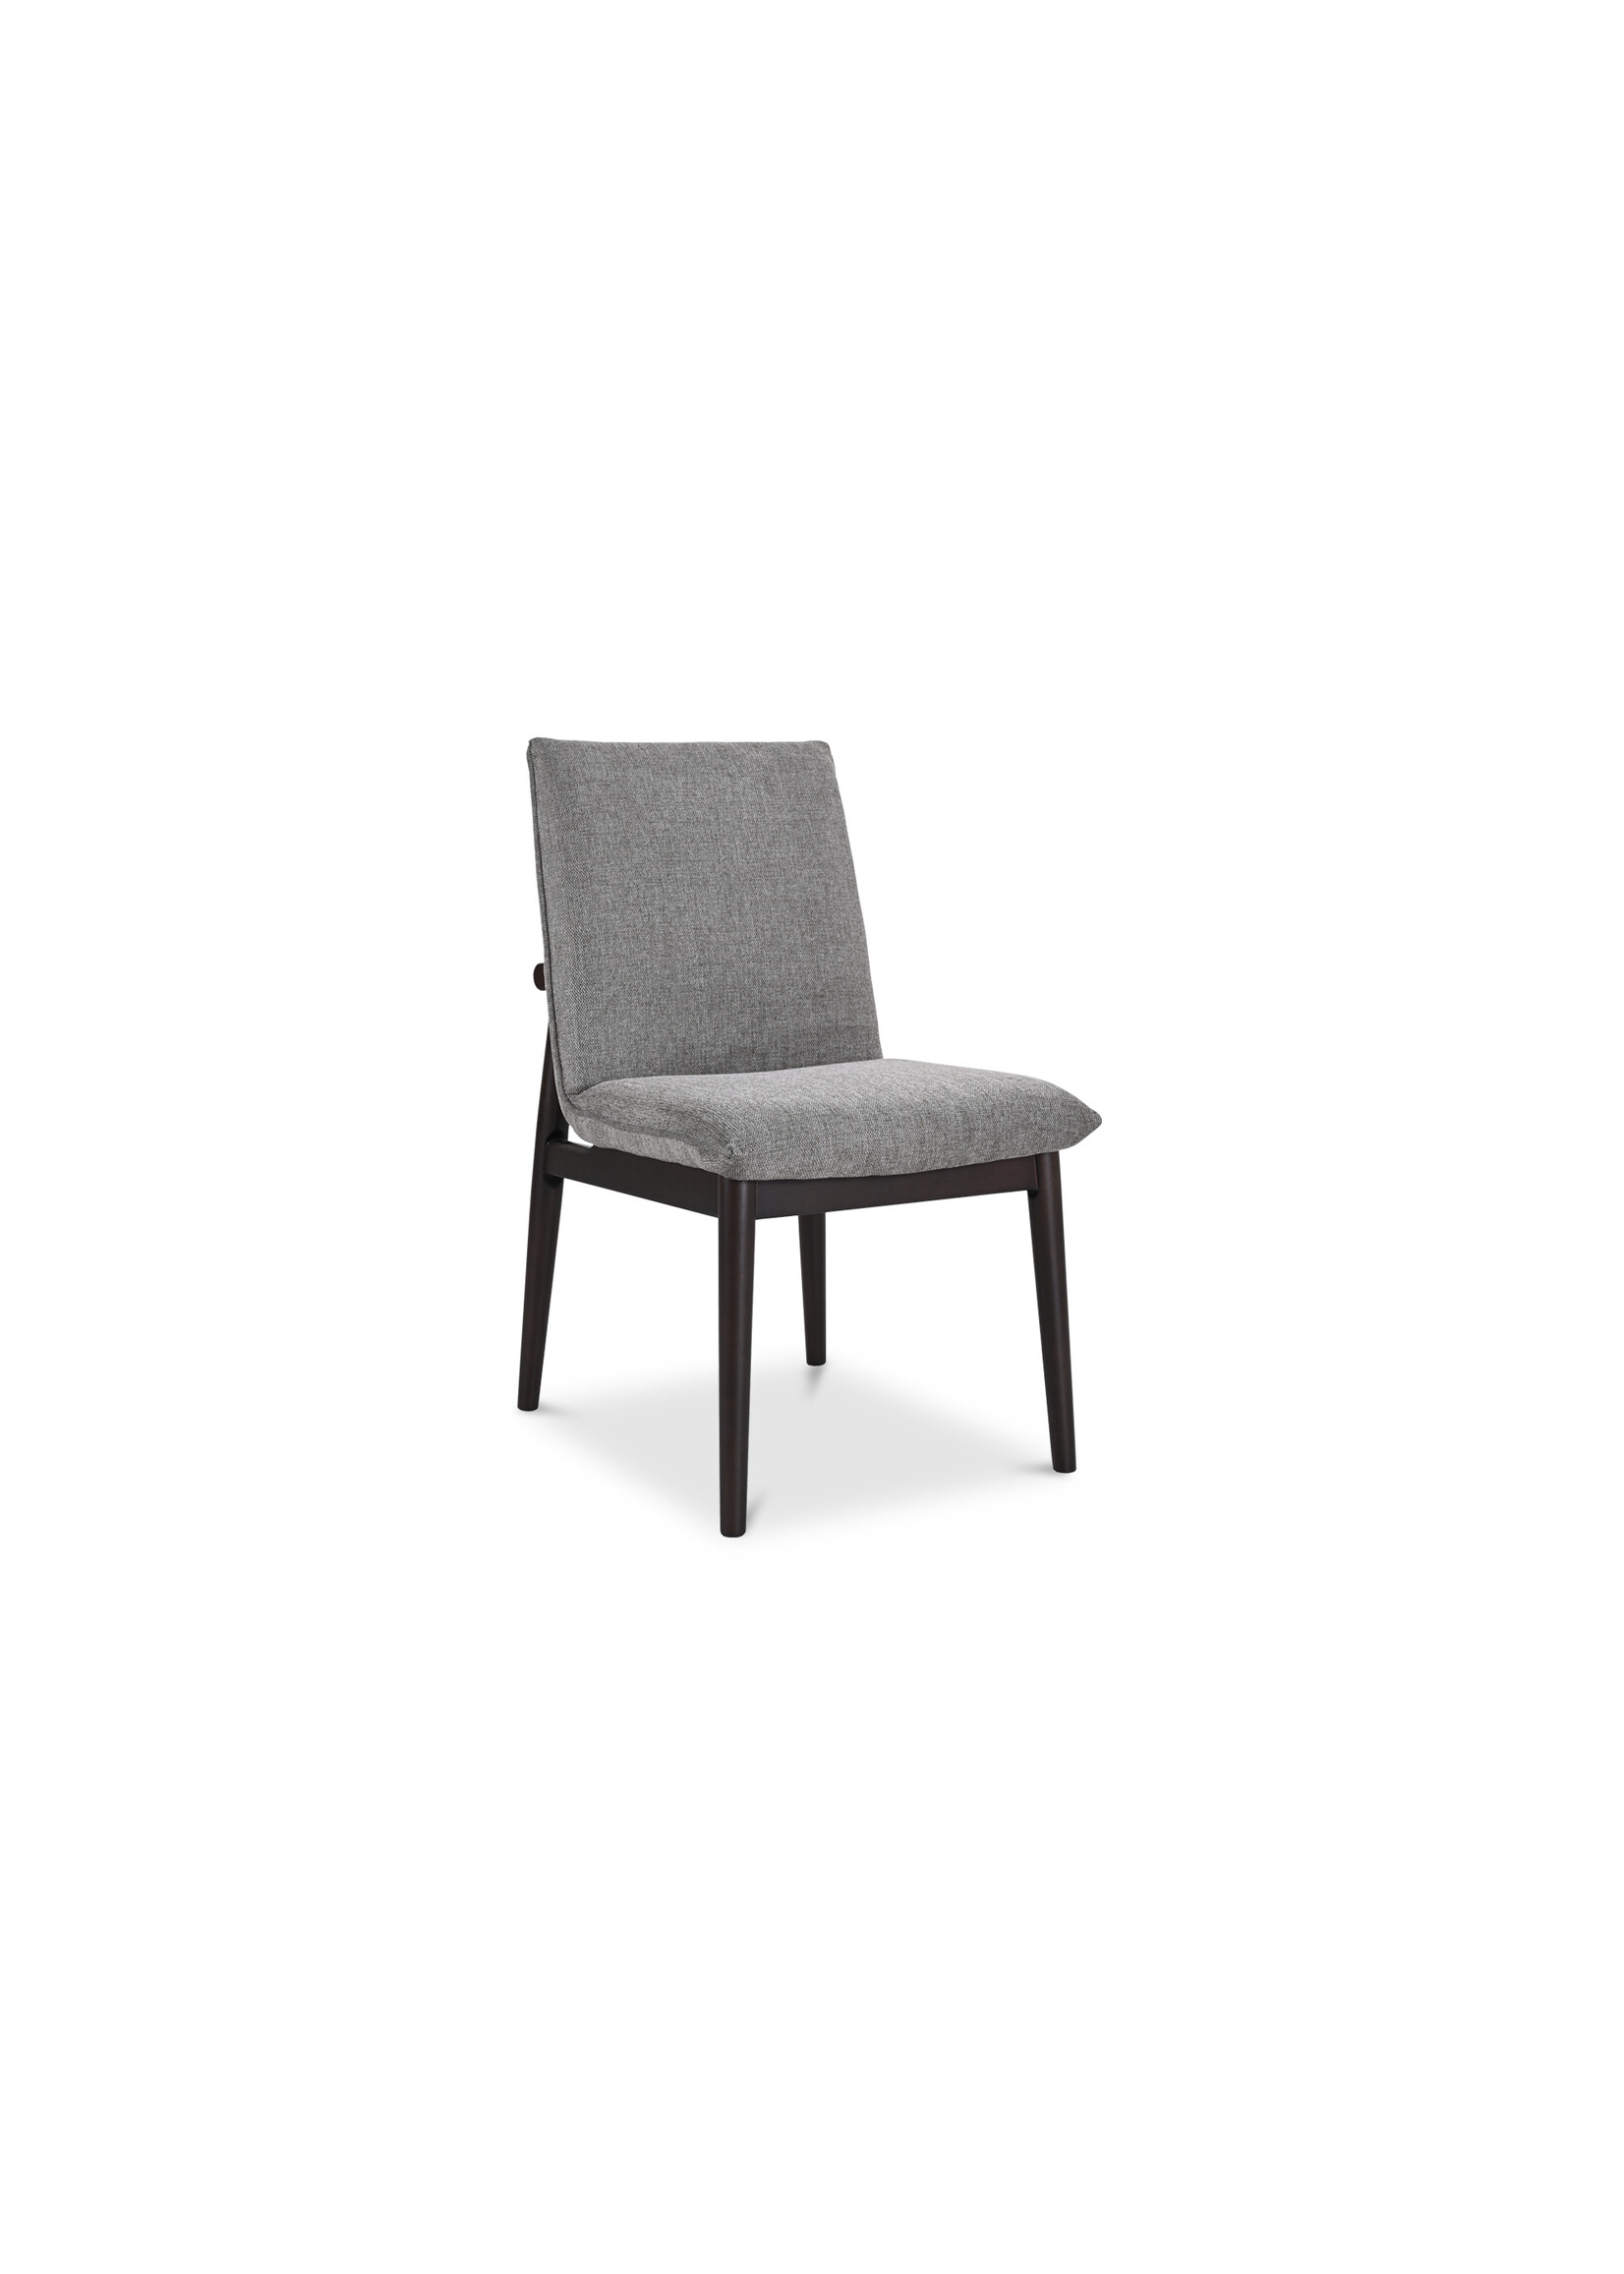 Charlie Dining Chair - Grey